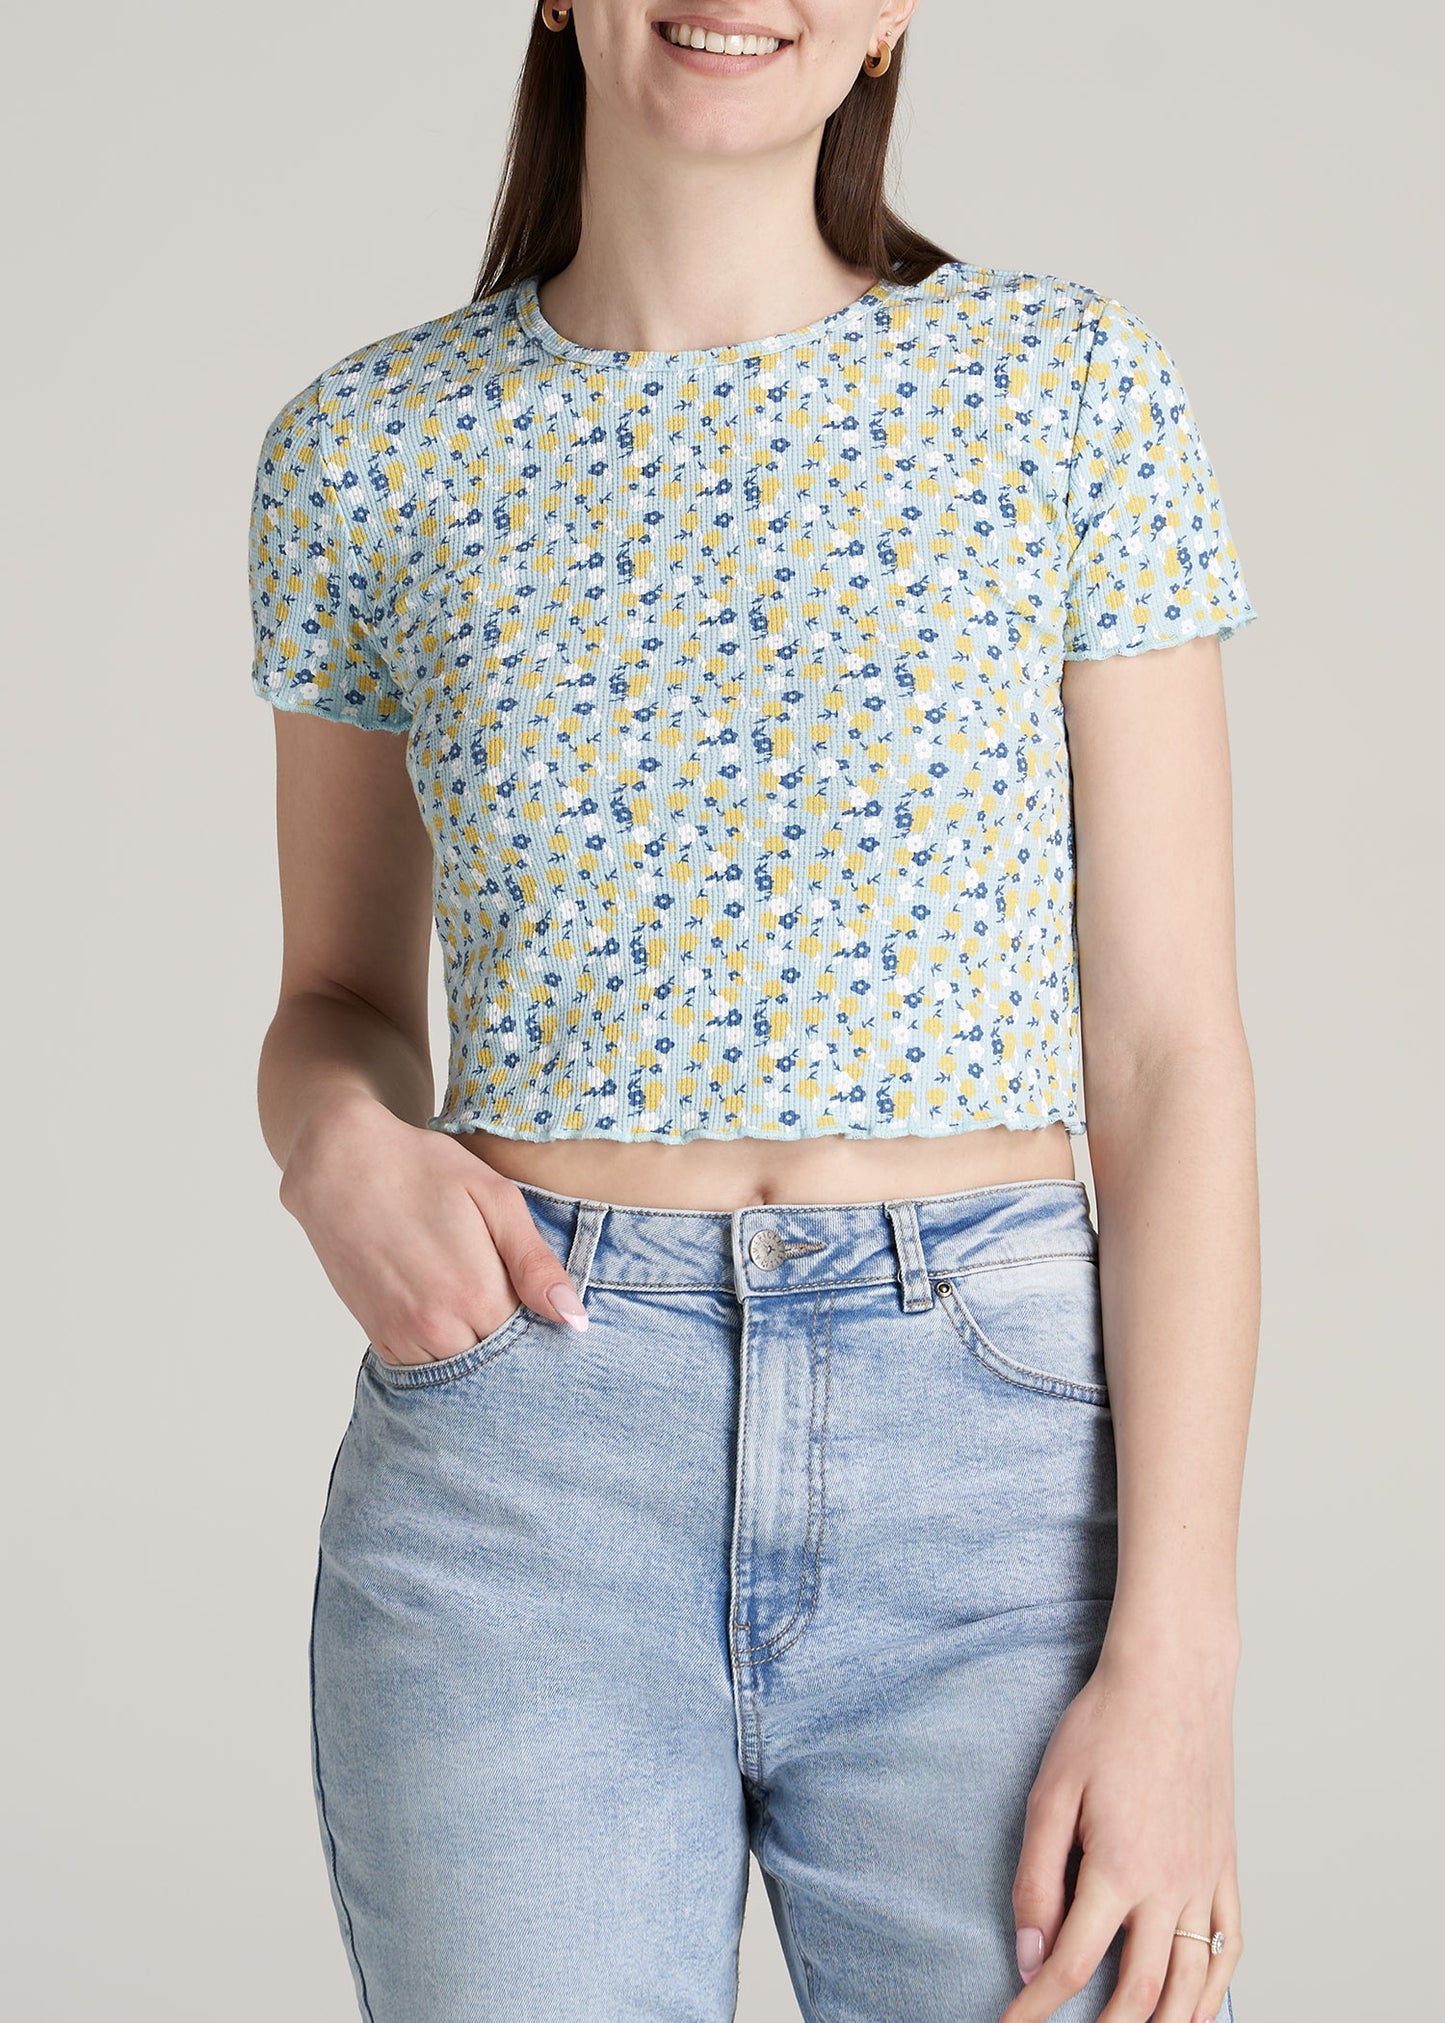 Women's Tall Cropped Waffle Tee Corydalis Blue Floral, American Tall